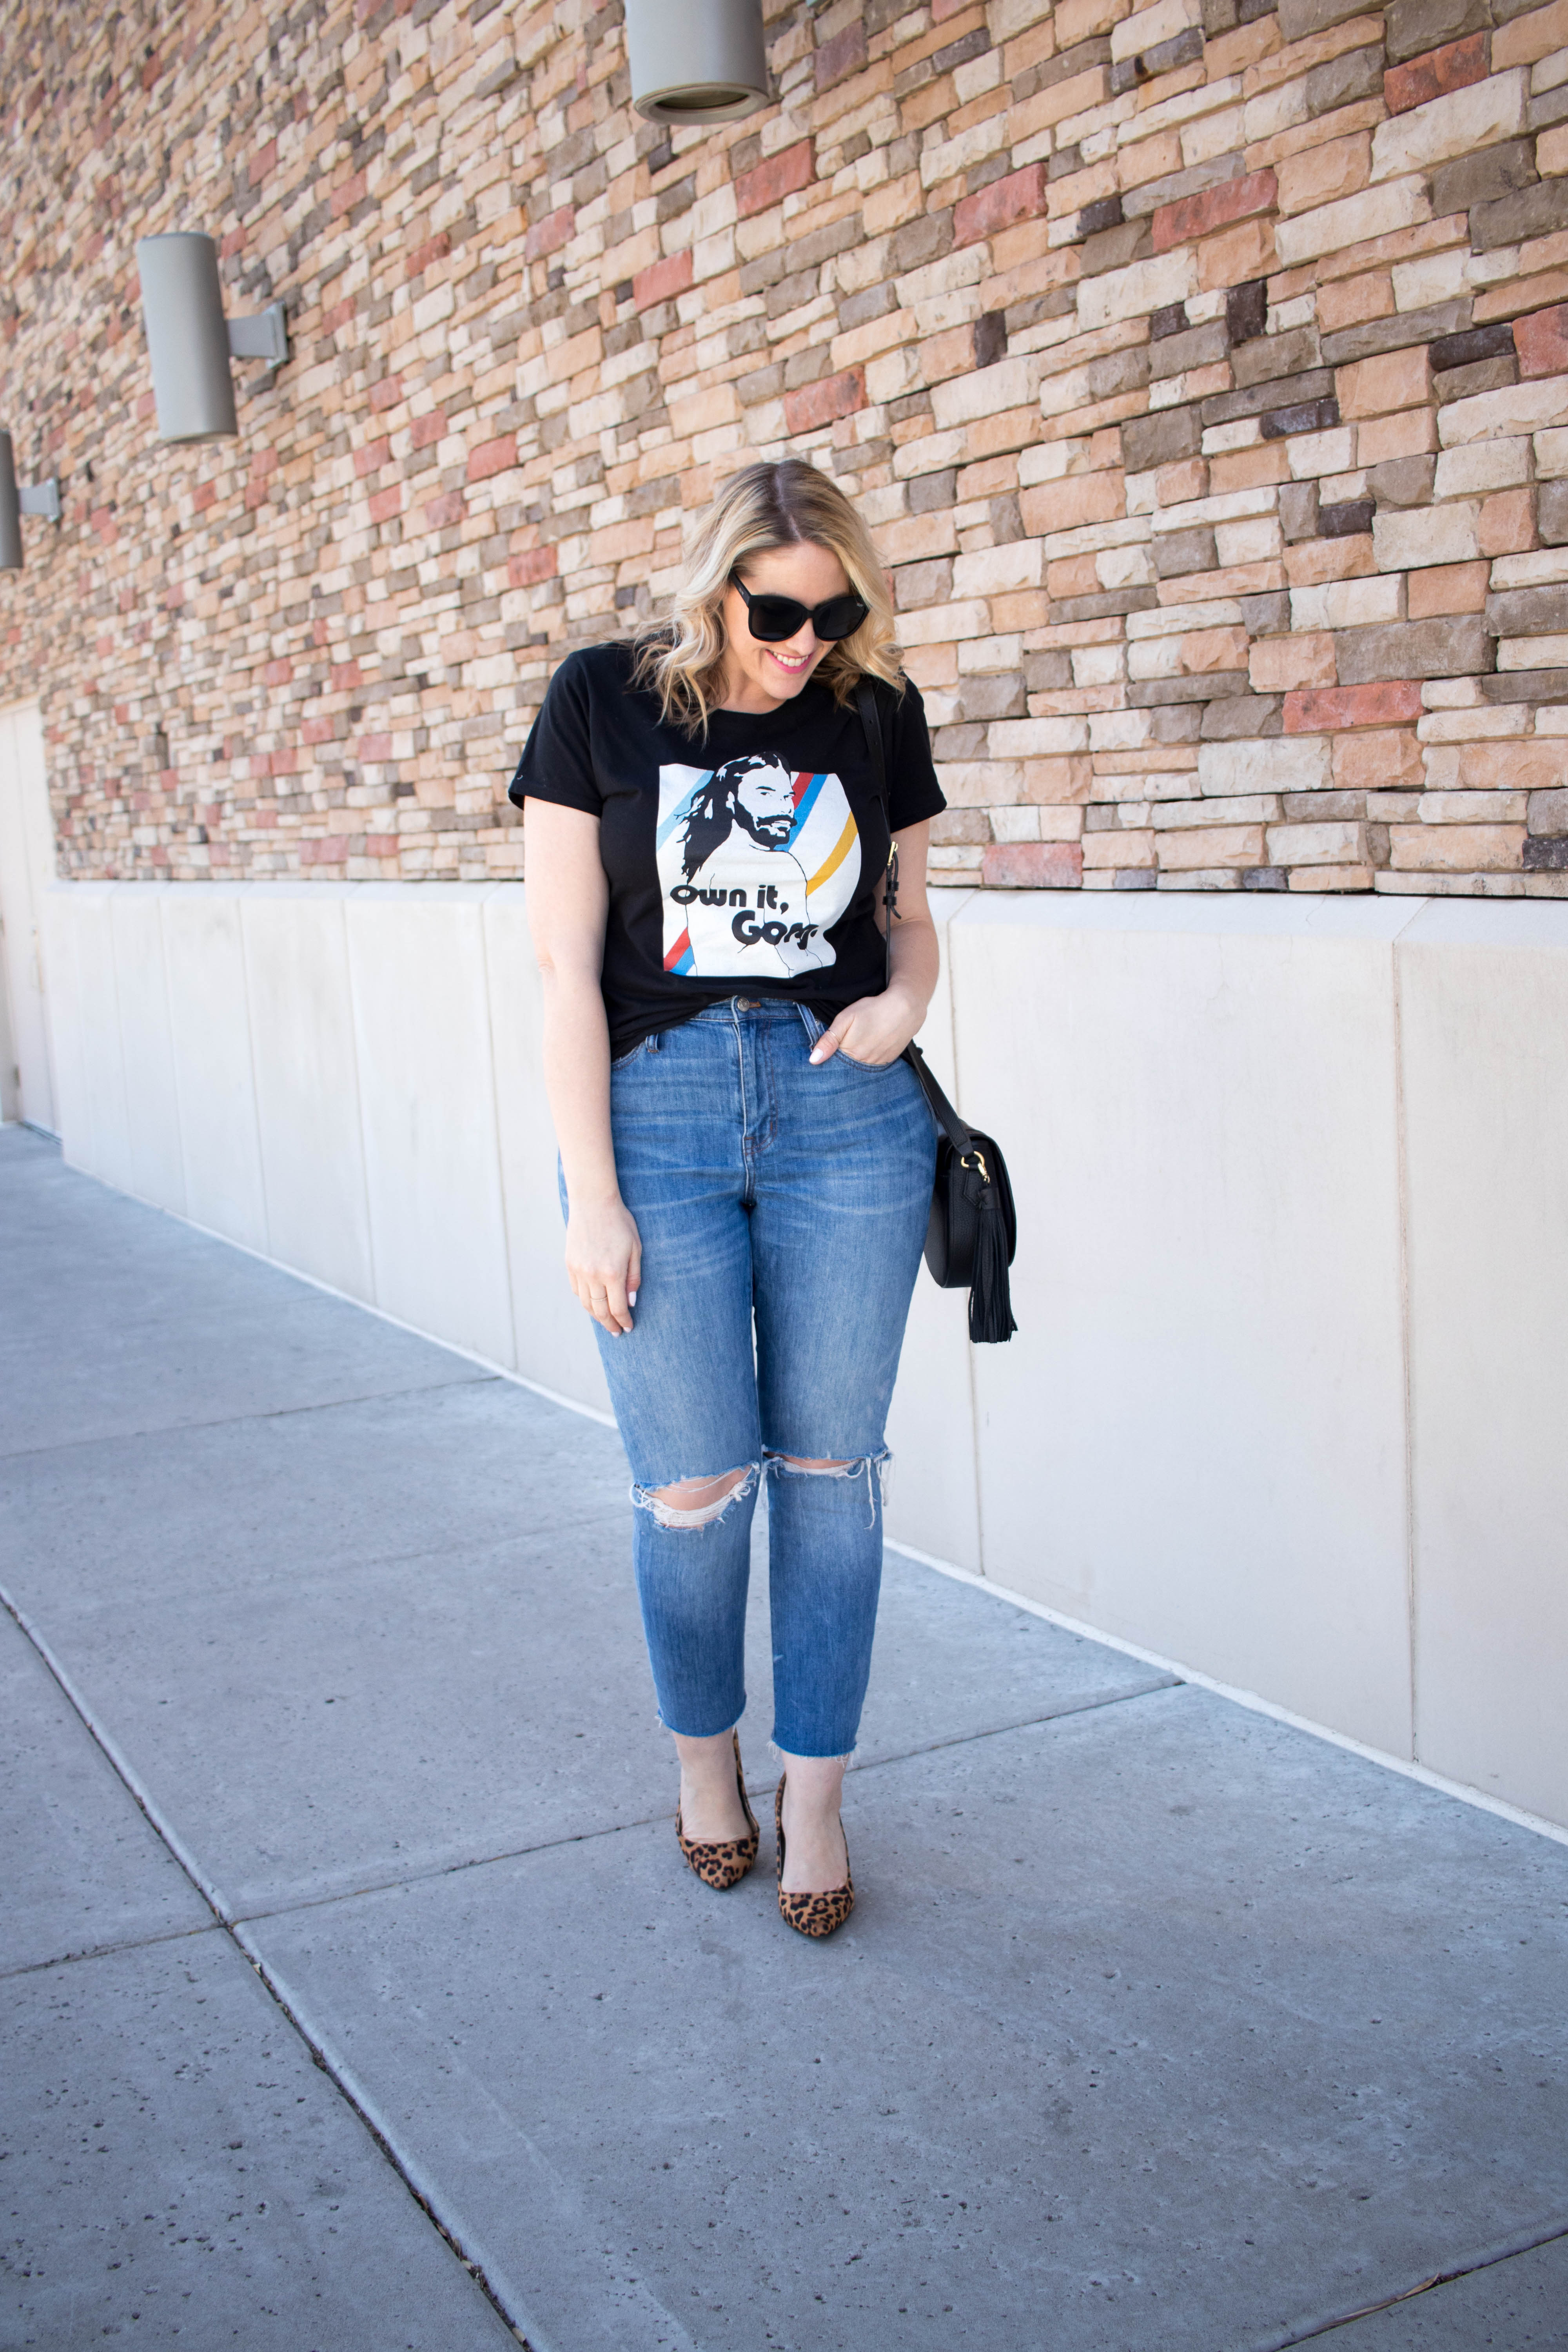 graphic tee and boyfriend jeans #madewell #ownitgorg #theweeklystyleedit